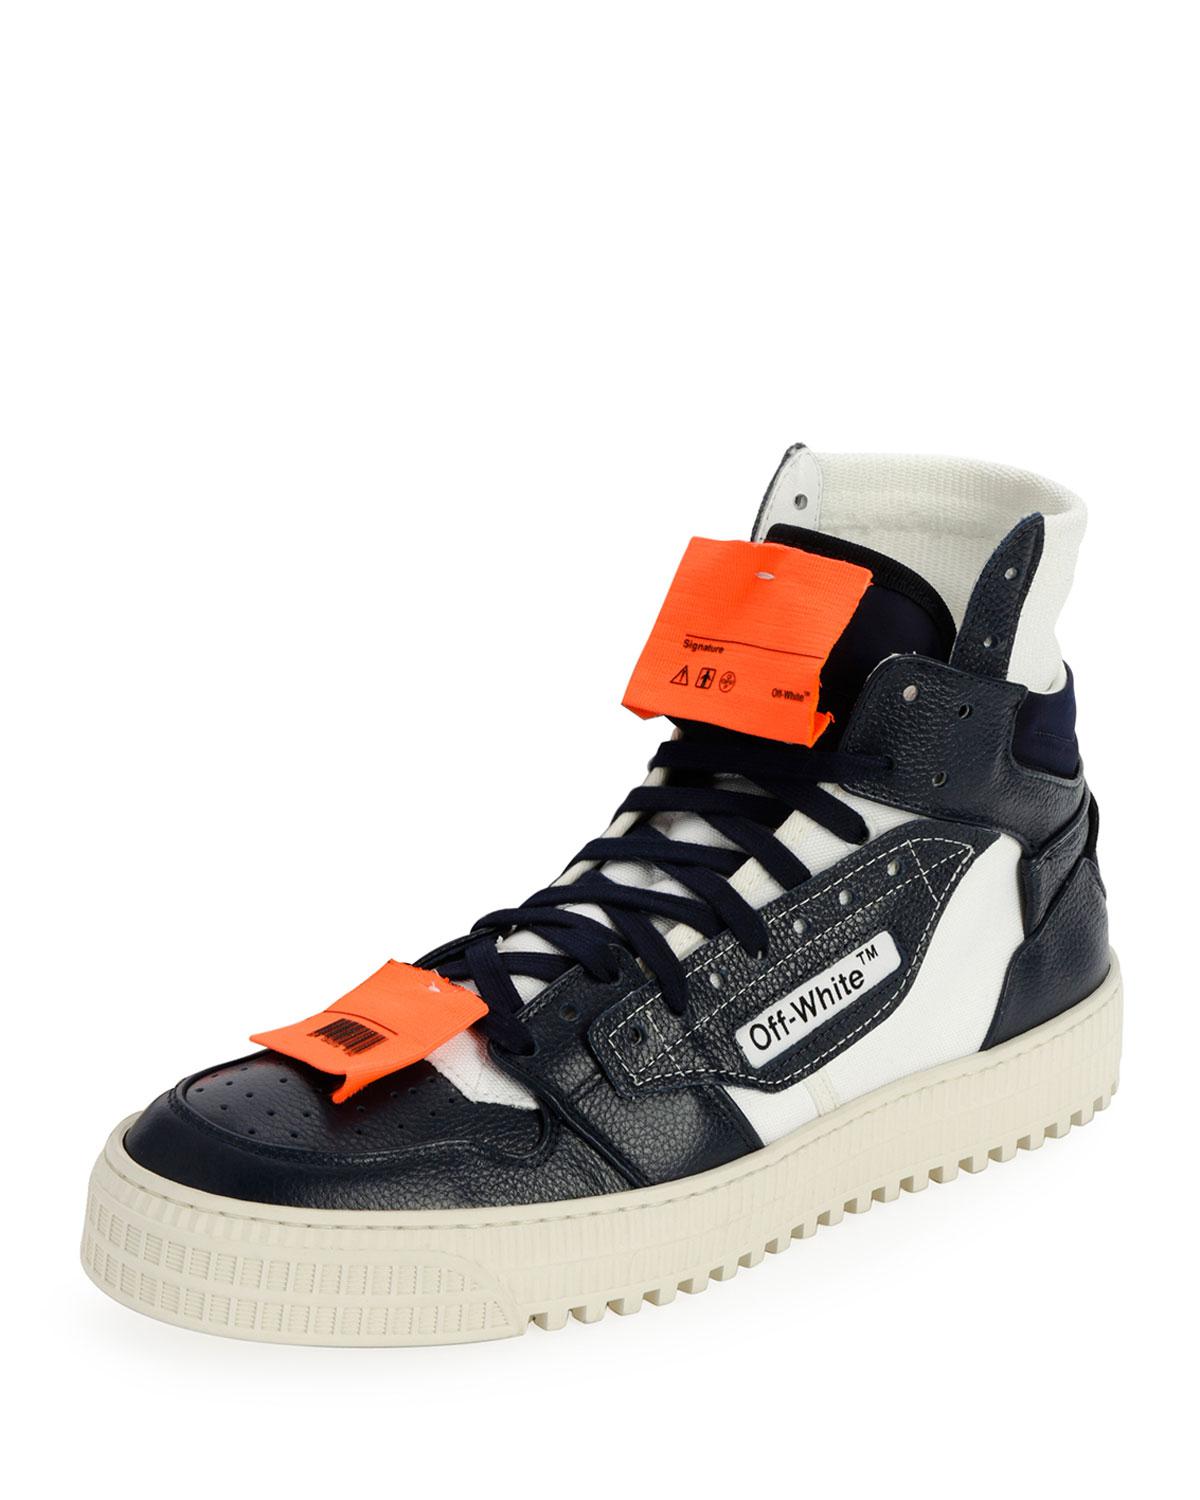 off white sneaker tag